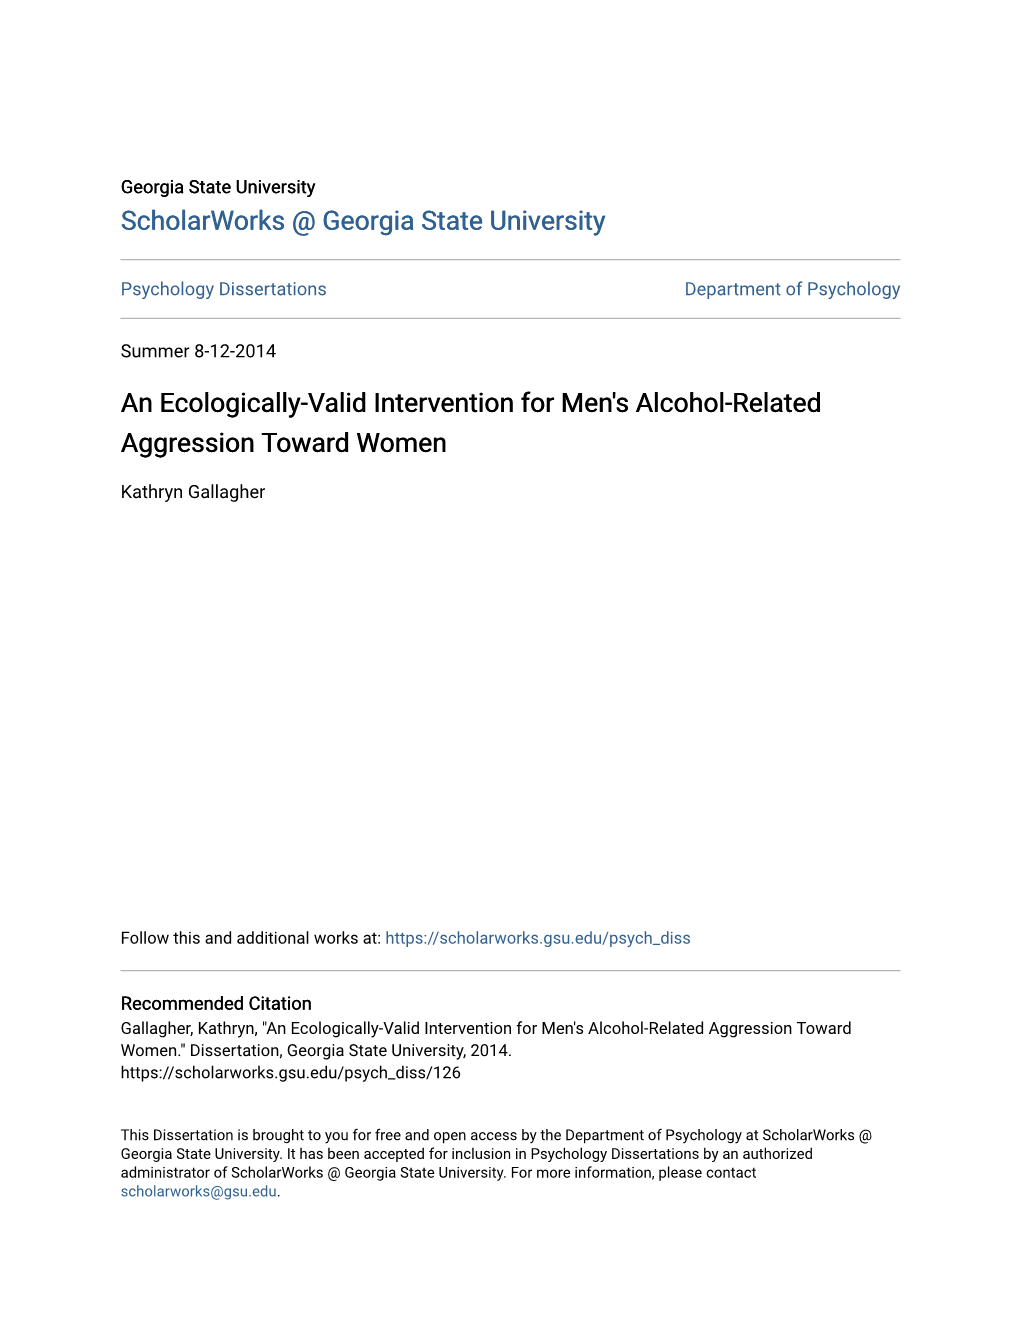 An Ecologically-Valid Intervention for Men's Alcohol-Related Aggression Toward Women